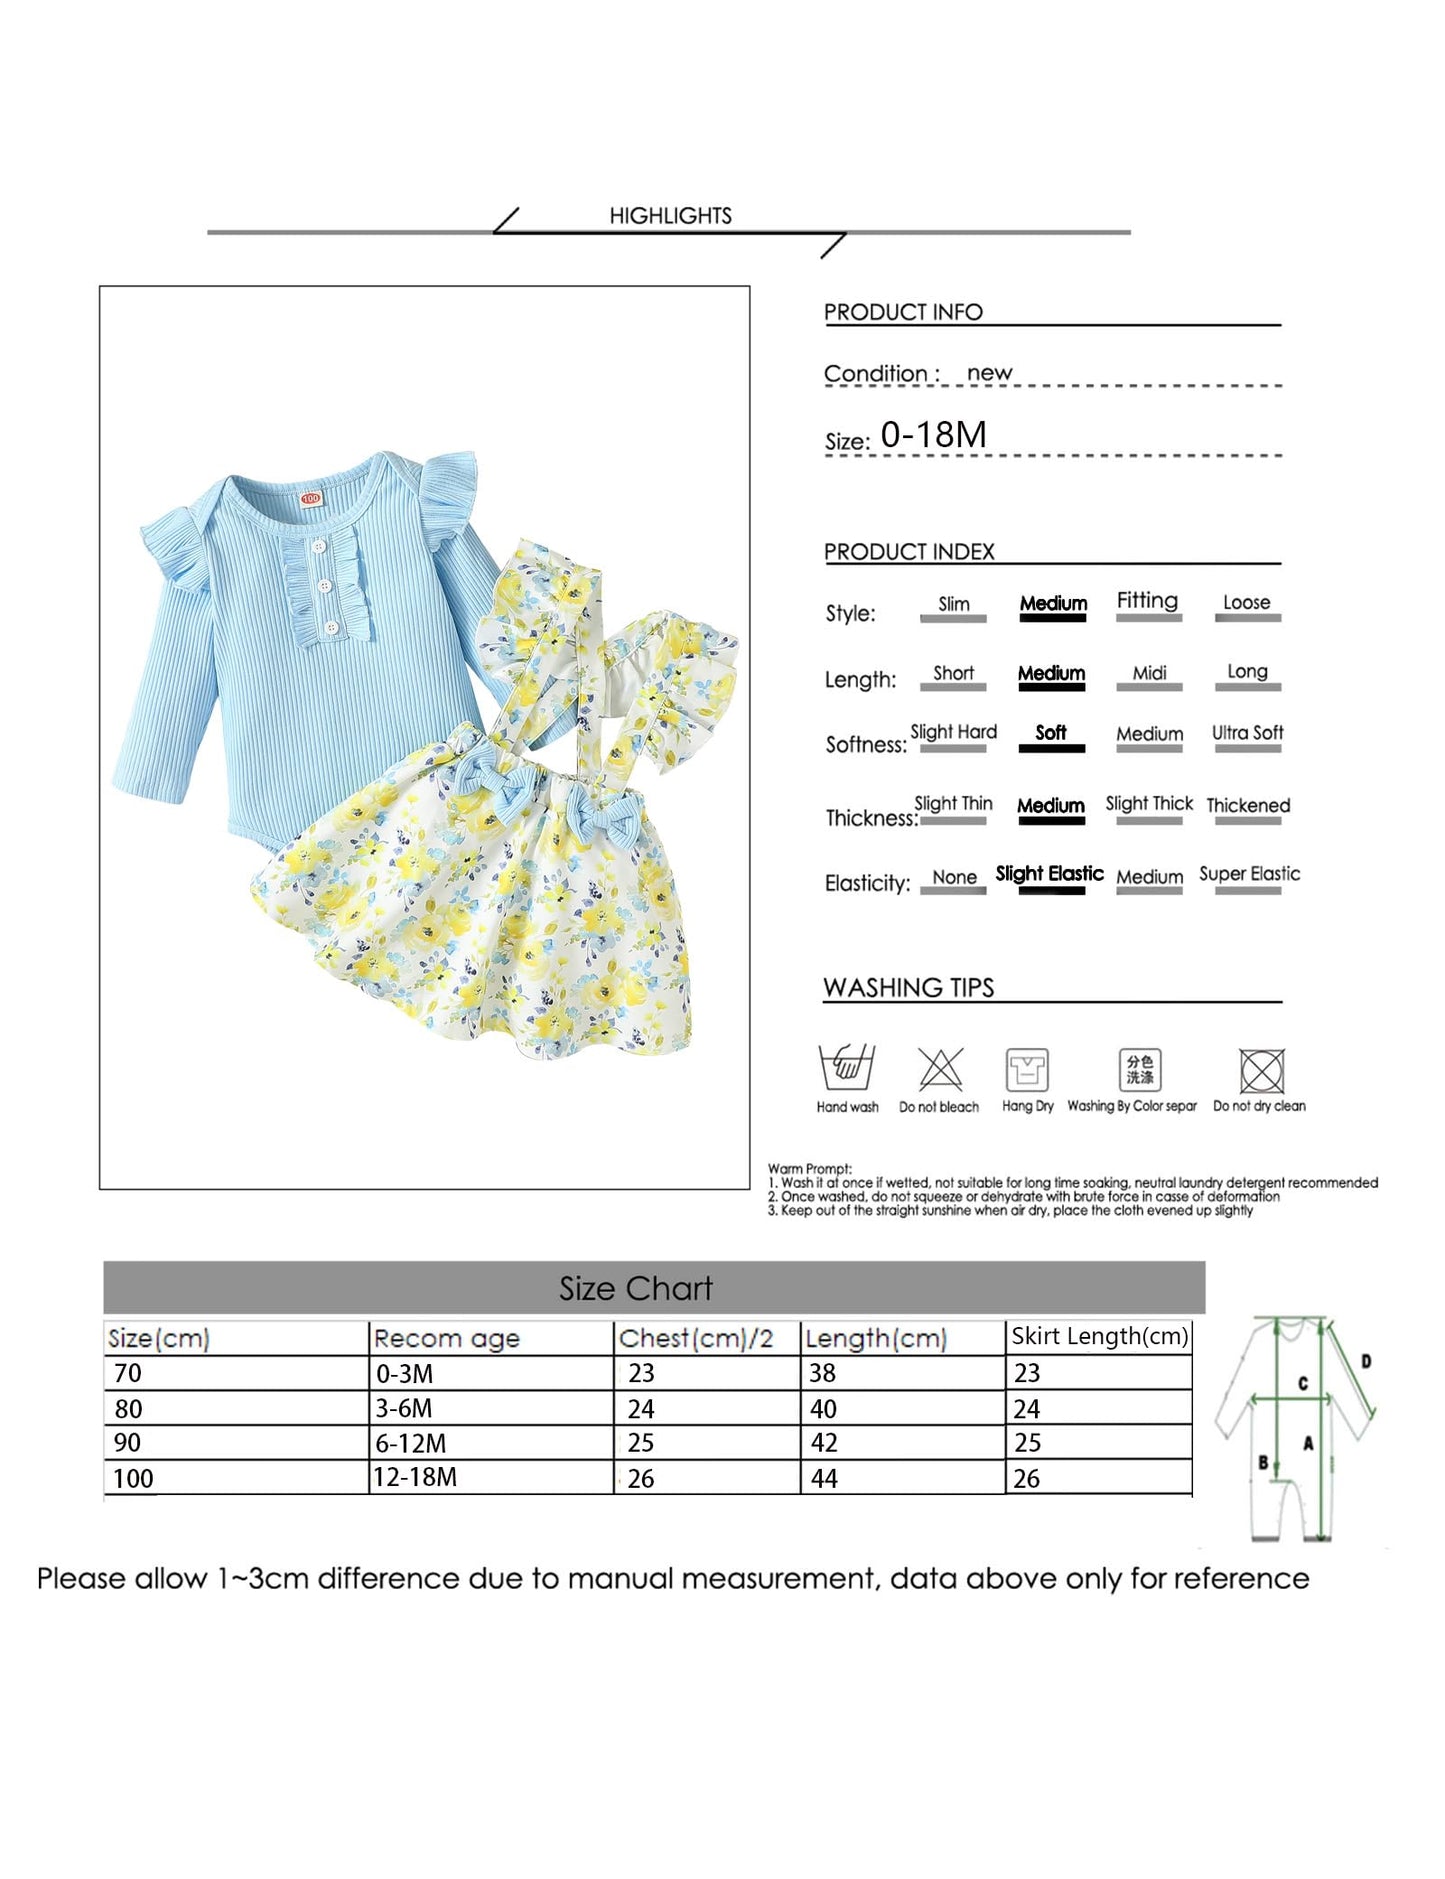 Haokaini Newborn Baby Girl Floral Braces Skirt Outfits Ruffle Long Sleeve Lace Romper Top with Headband Jumpsuit Dress Clothing Set, for 0-3 Months